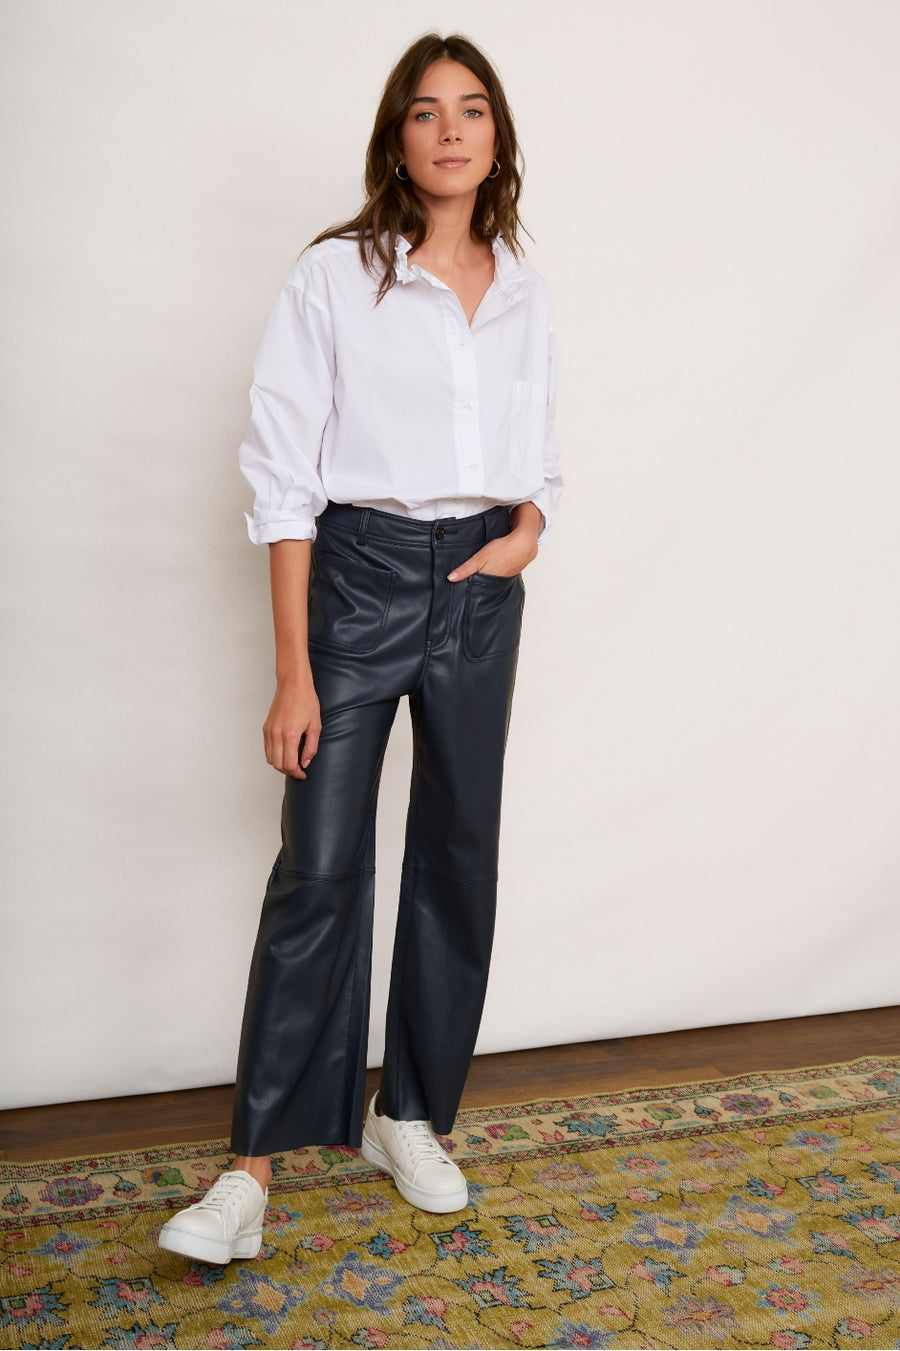 ZW NAVY STRAIGHT-LEG HIGH-WAIST FAUX LEATHER TROUSERS - Black